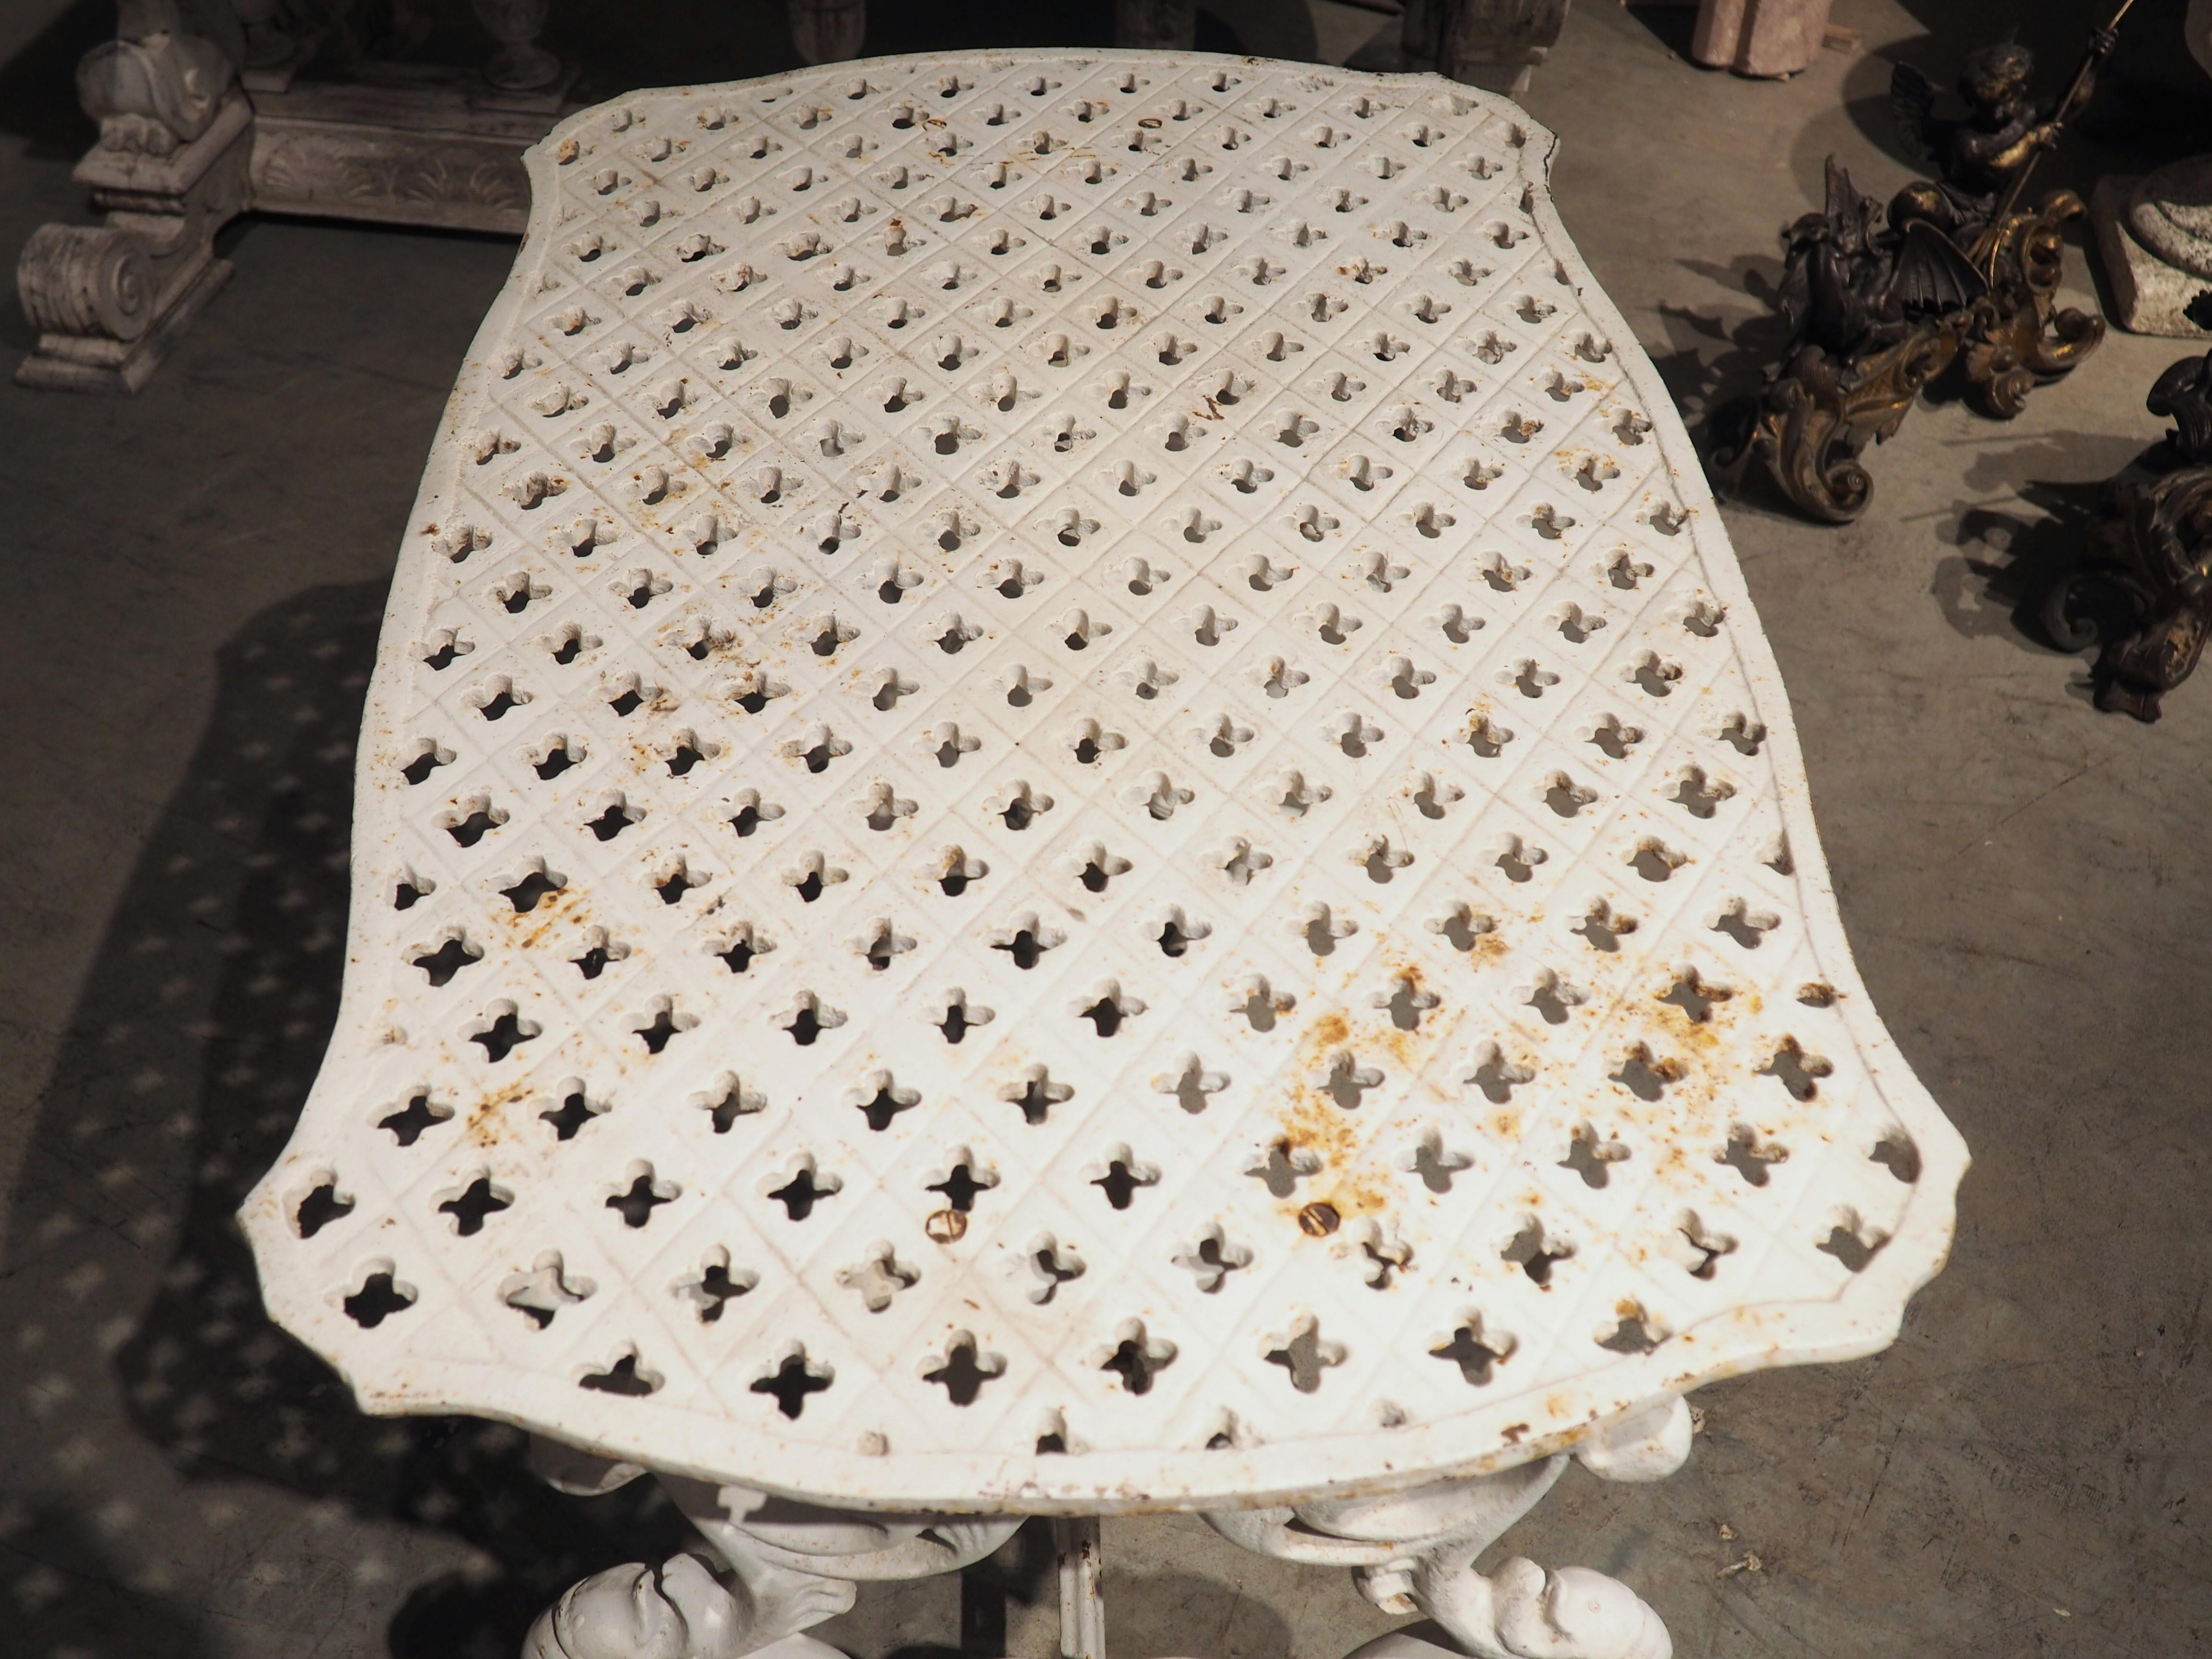 An interesting, early 1900’s side table from France, this cast iron table features a latticework shaped top over an elaborate foliate and baluster base. The roughly rectangular top has thin, undulating edges, surrounding a lozenge pattern filled